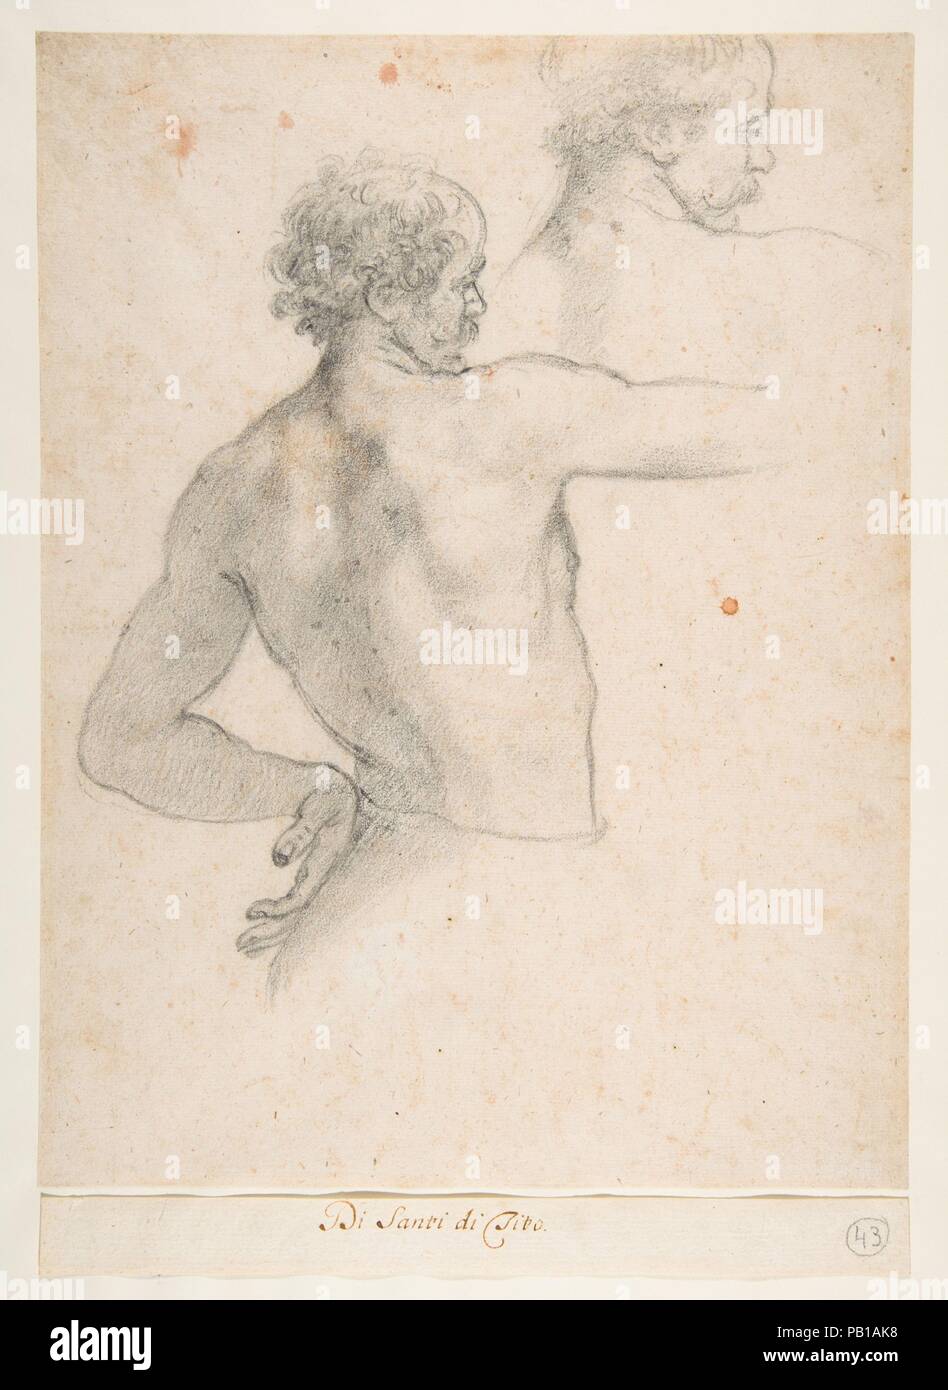 Two Studies of a Man. Artist: Santi di Tito (Italian, Sansepolcro 1536-1603 Florence). Dimensions: sheet: 13 3/4 x 6 7/8 in. (35 x 17.5 cm). Date: ca. 1575.  A pupil of Bronzino and Alessandro Allori, Santi di Tito was among the founders in 1563 of the Florentine Accademia del Disegno (the Academy of Drawing). He had a leading role among the generation of late-sixteenth-century Tuscan painters who turned to the practice of carefully observed life drawing to direct their pictorial language away from an abstract Mannerist vocabulary and toward one of greater naturalism. Of great psychological pr Stock Photo